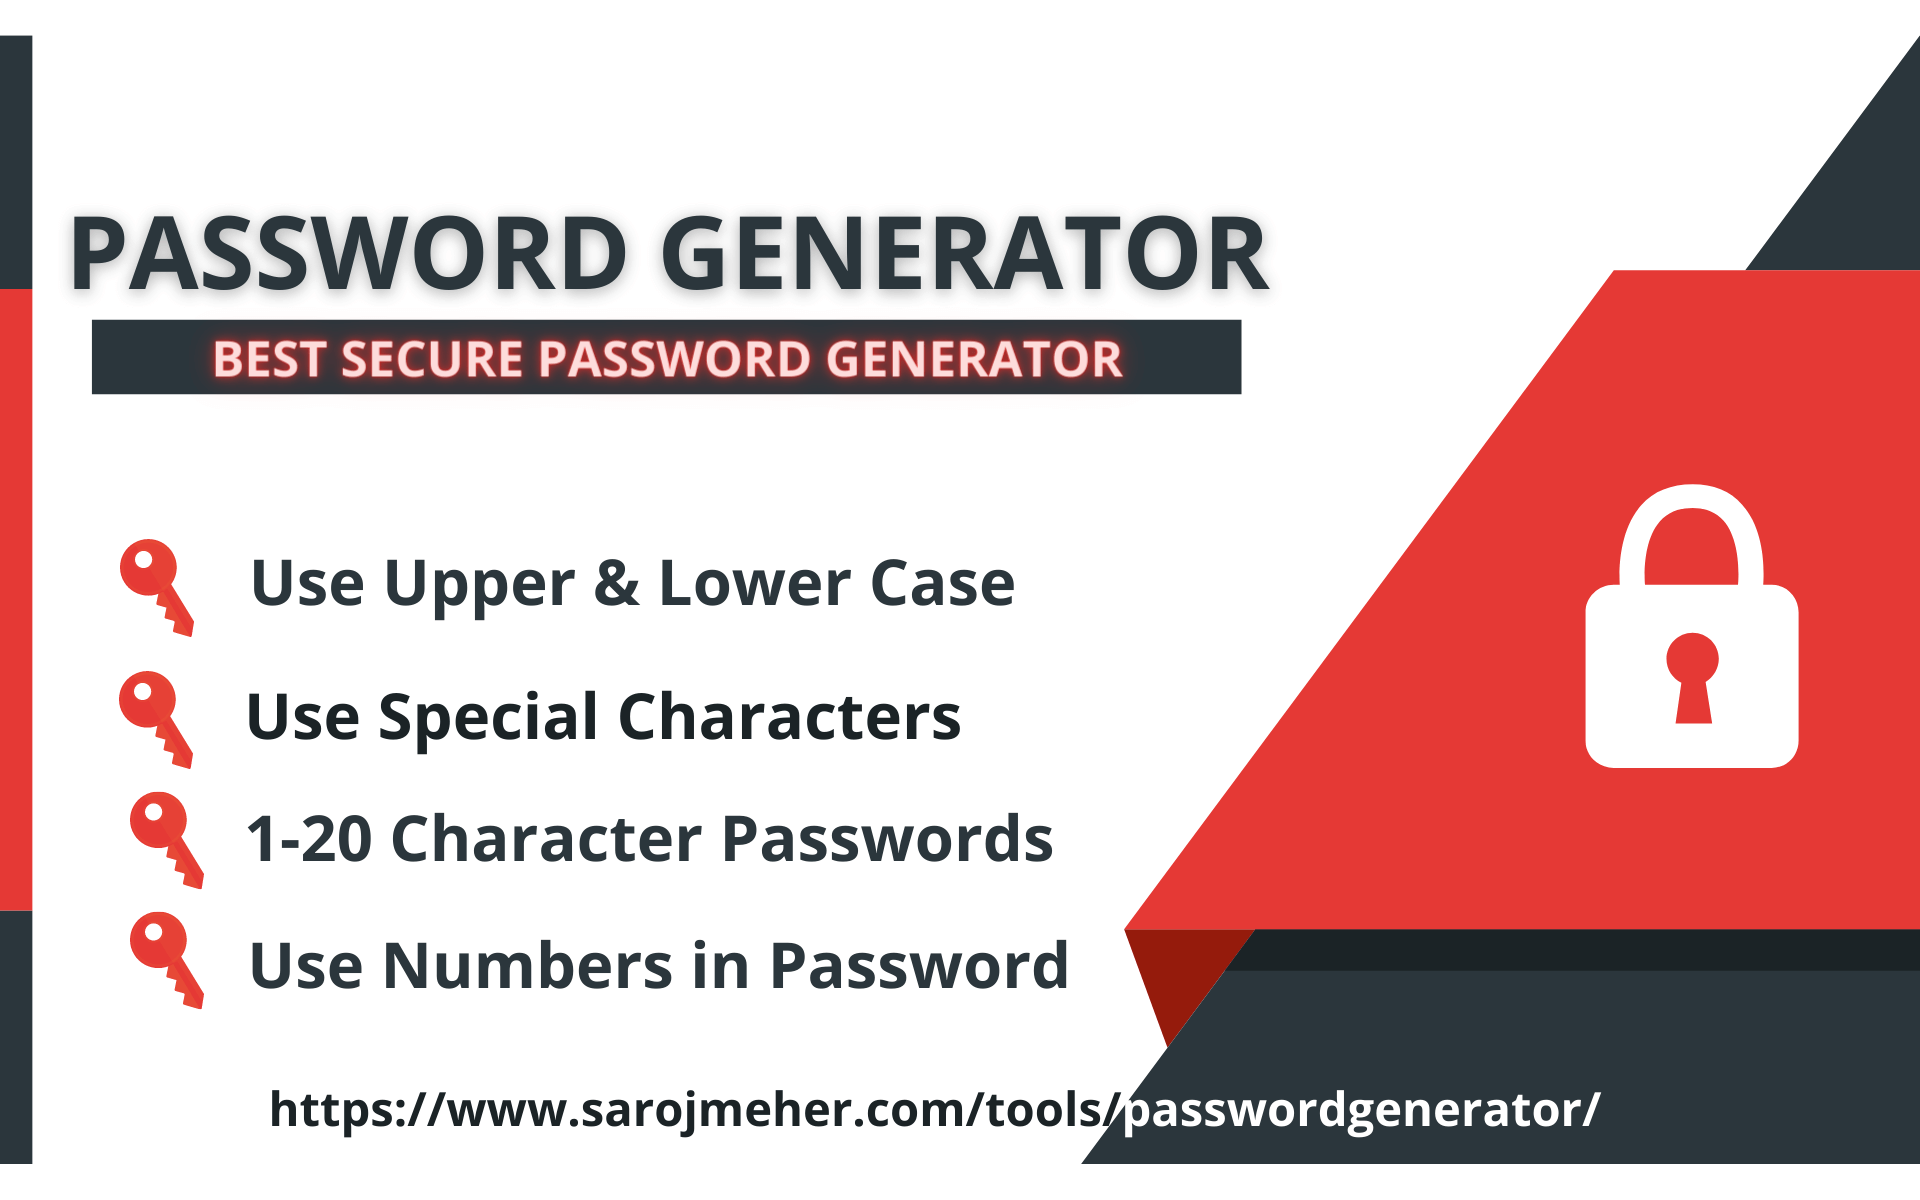 How to use this Password Generator